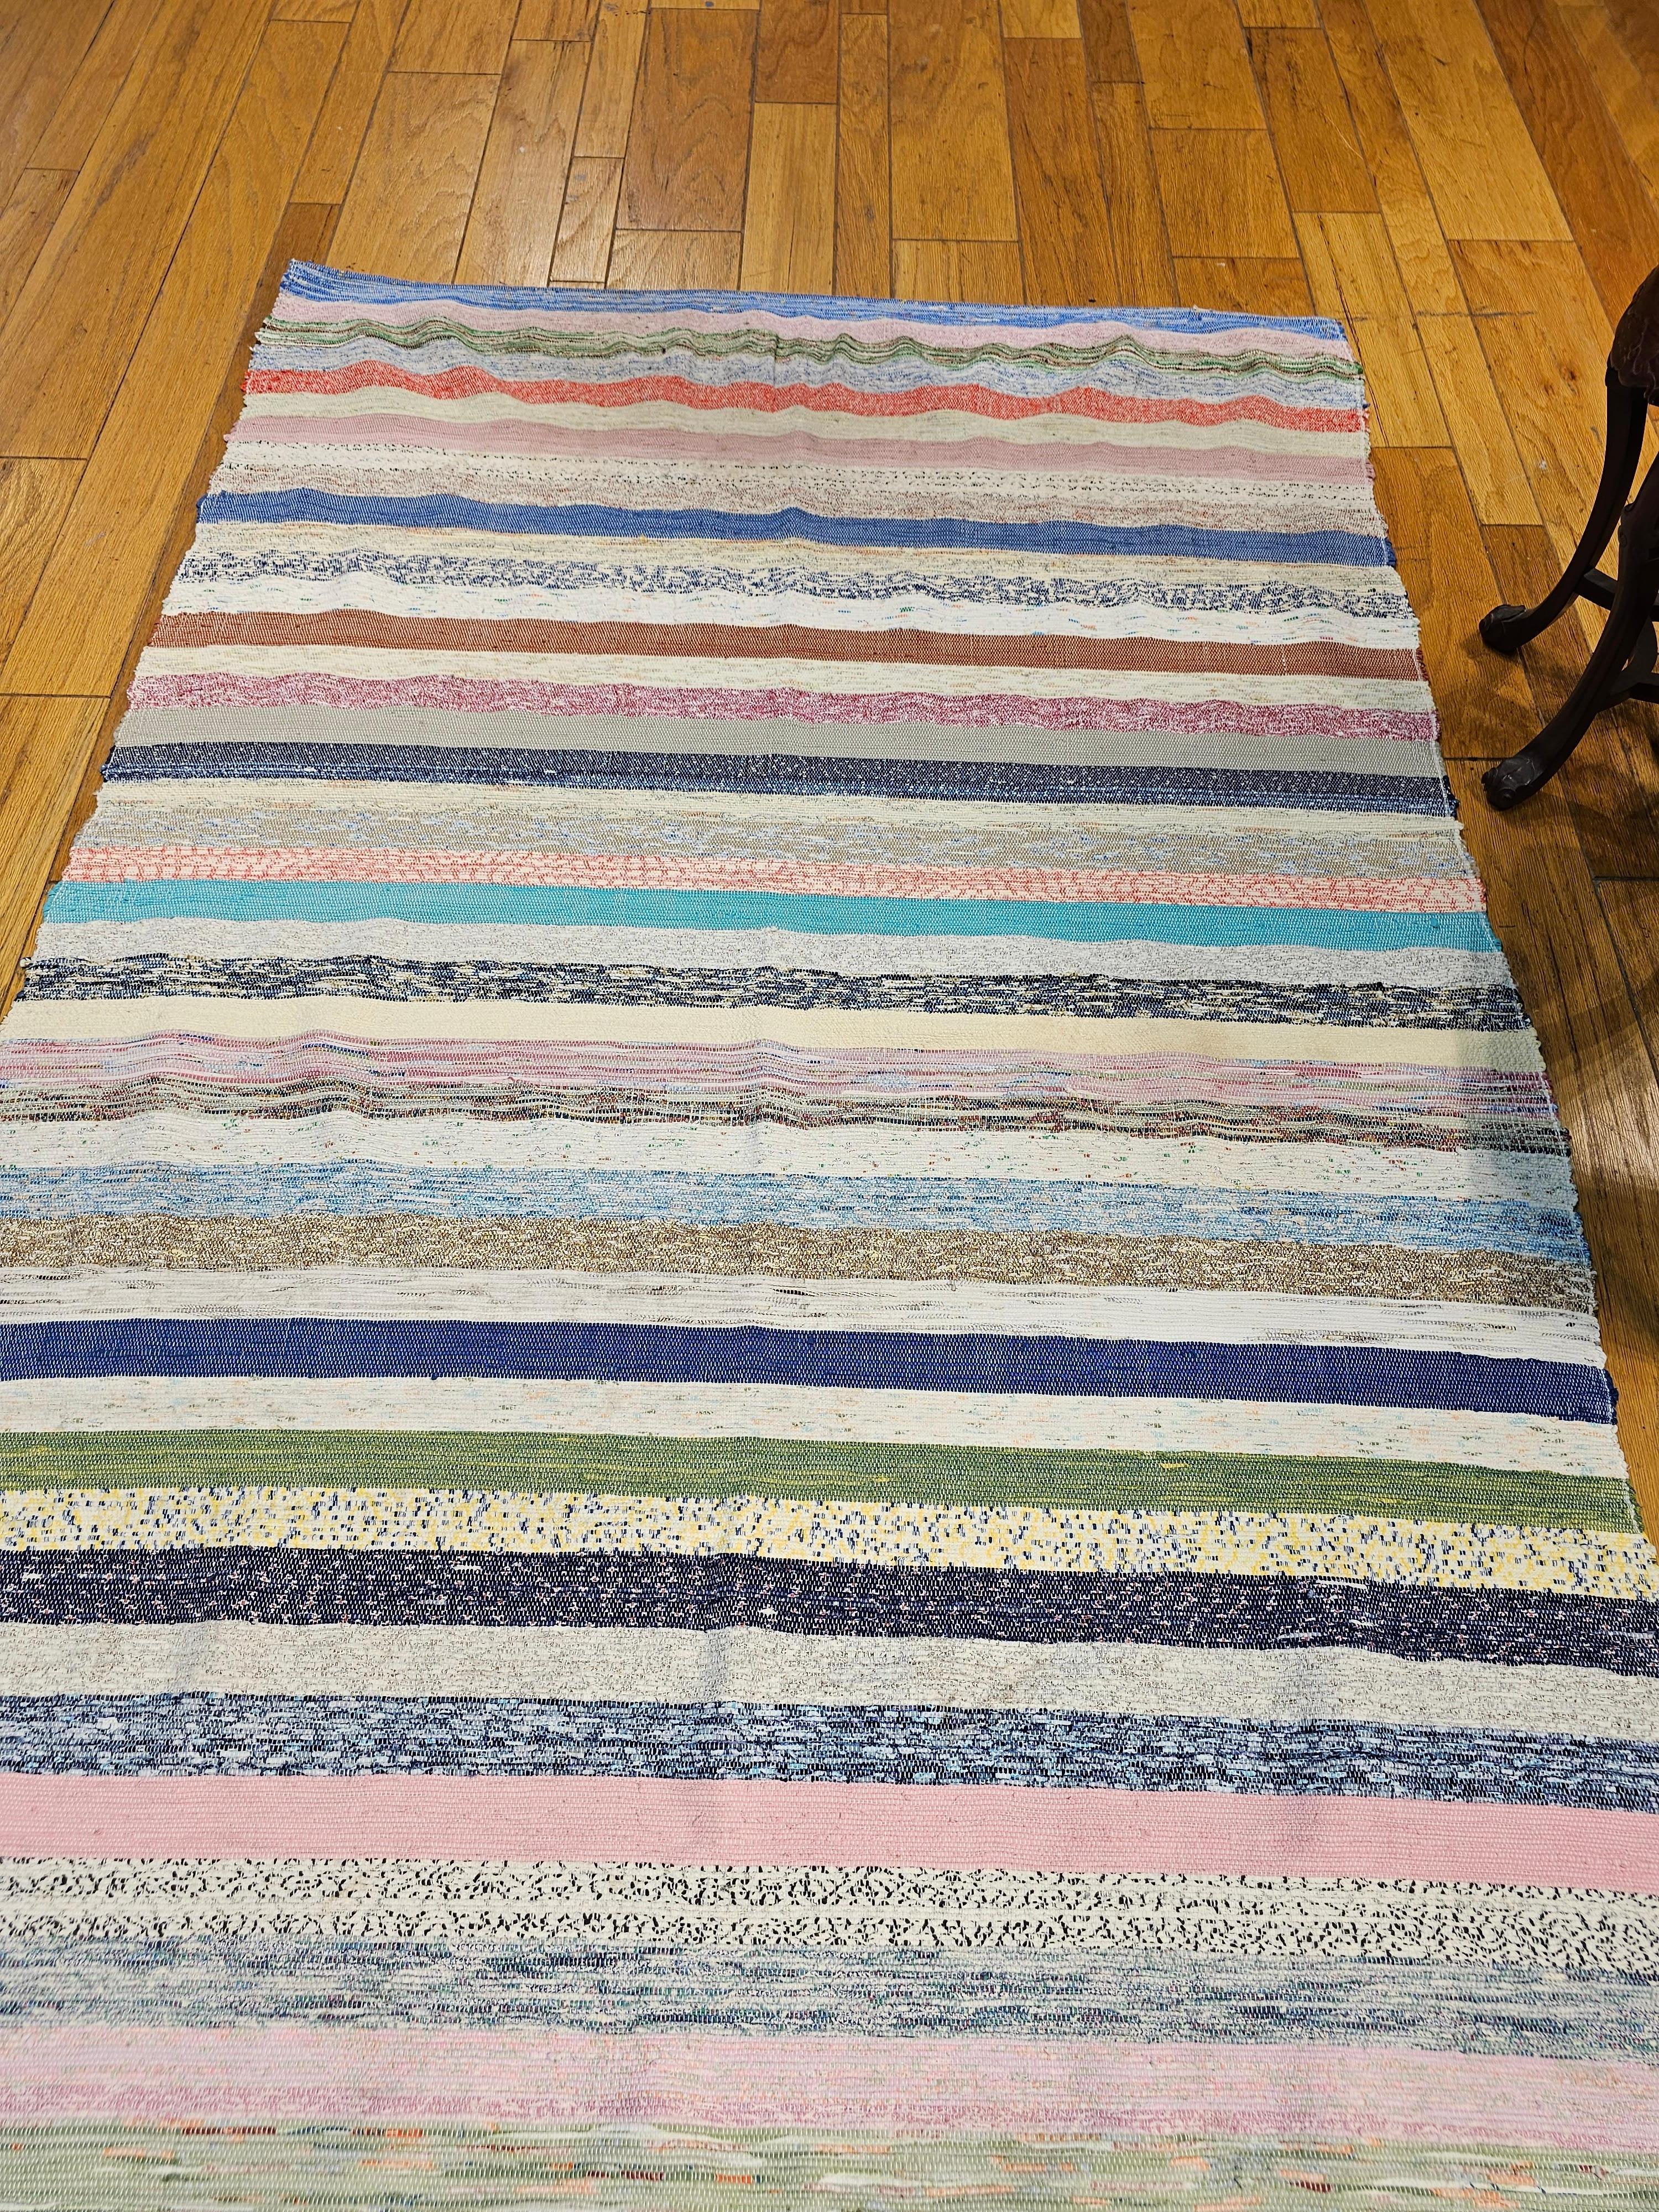  This beautiful multicolor American Rag Area Rug has a very modern design format and can be incorporated into any modern interior design project.  The rug is formed of a series of bands in natural earth tones very similar to Scandinavian kilims from